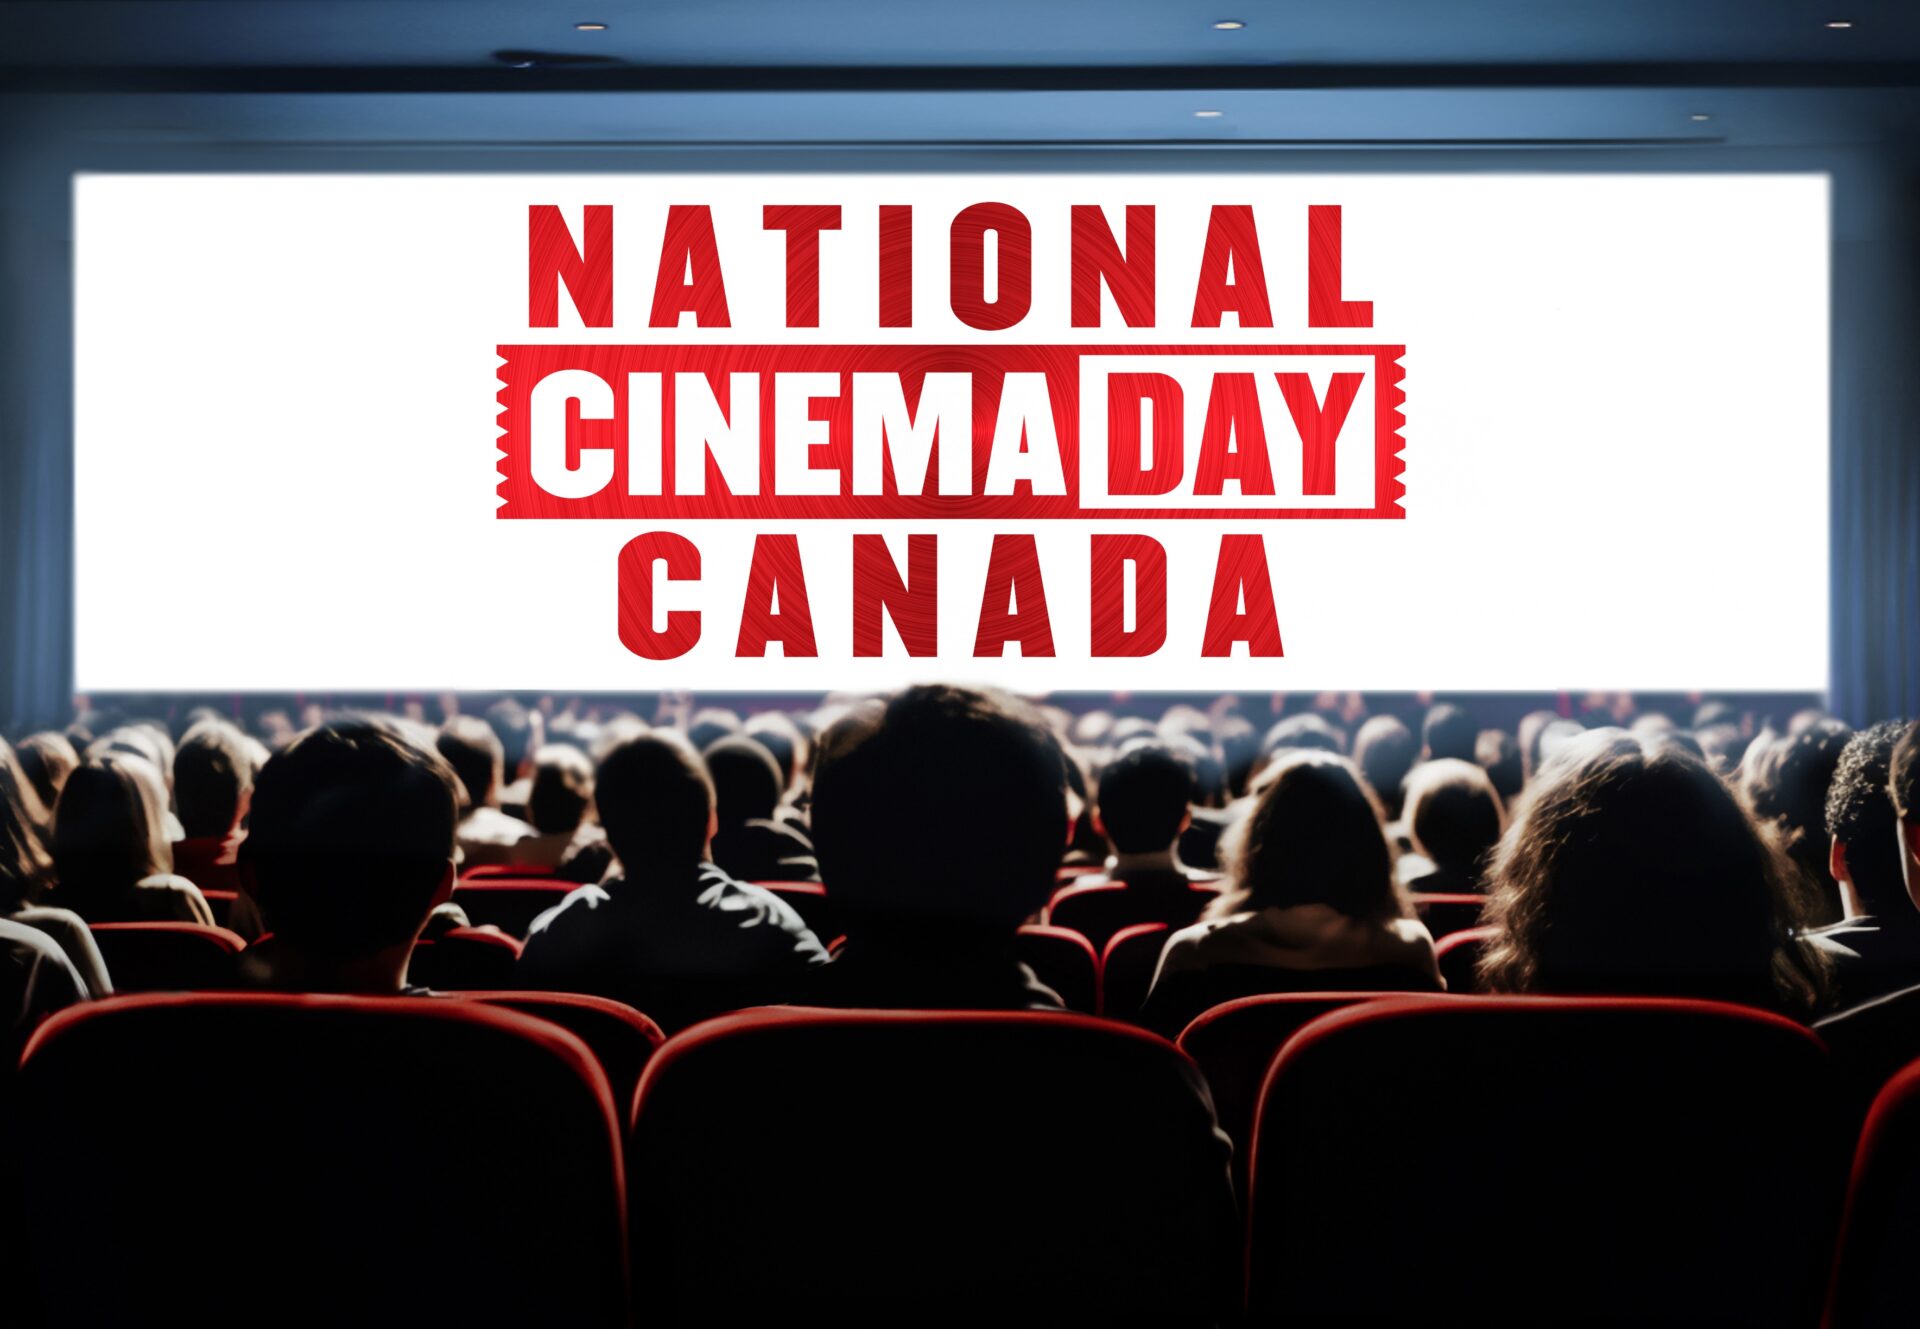 Aug. 27: National Cinema Day means $4 movies for everyone!